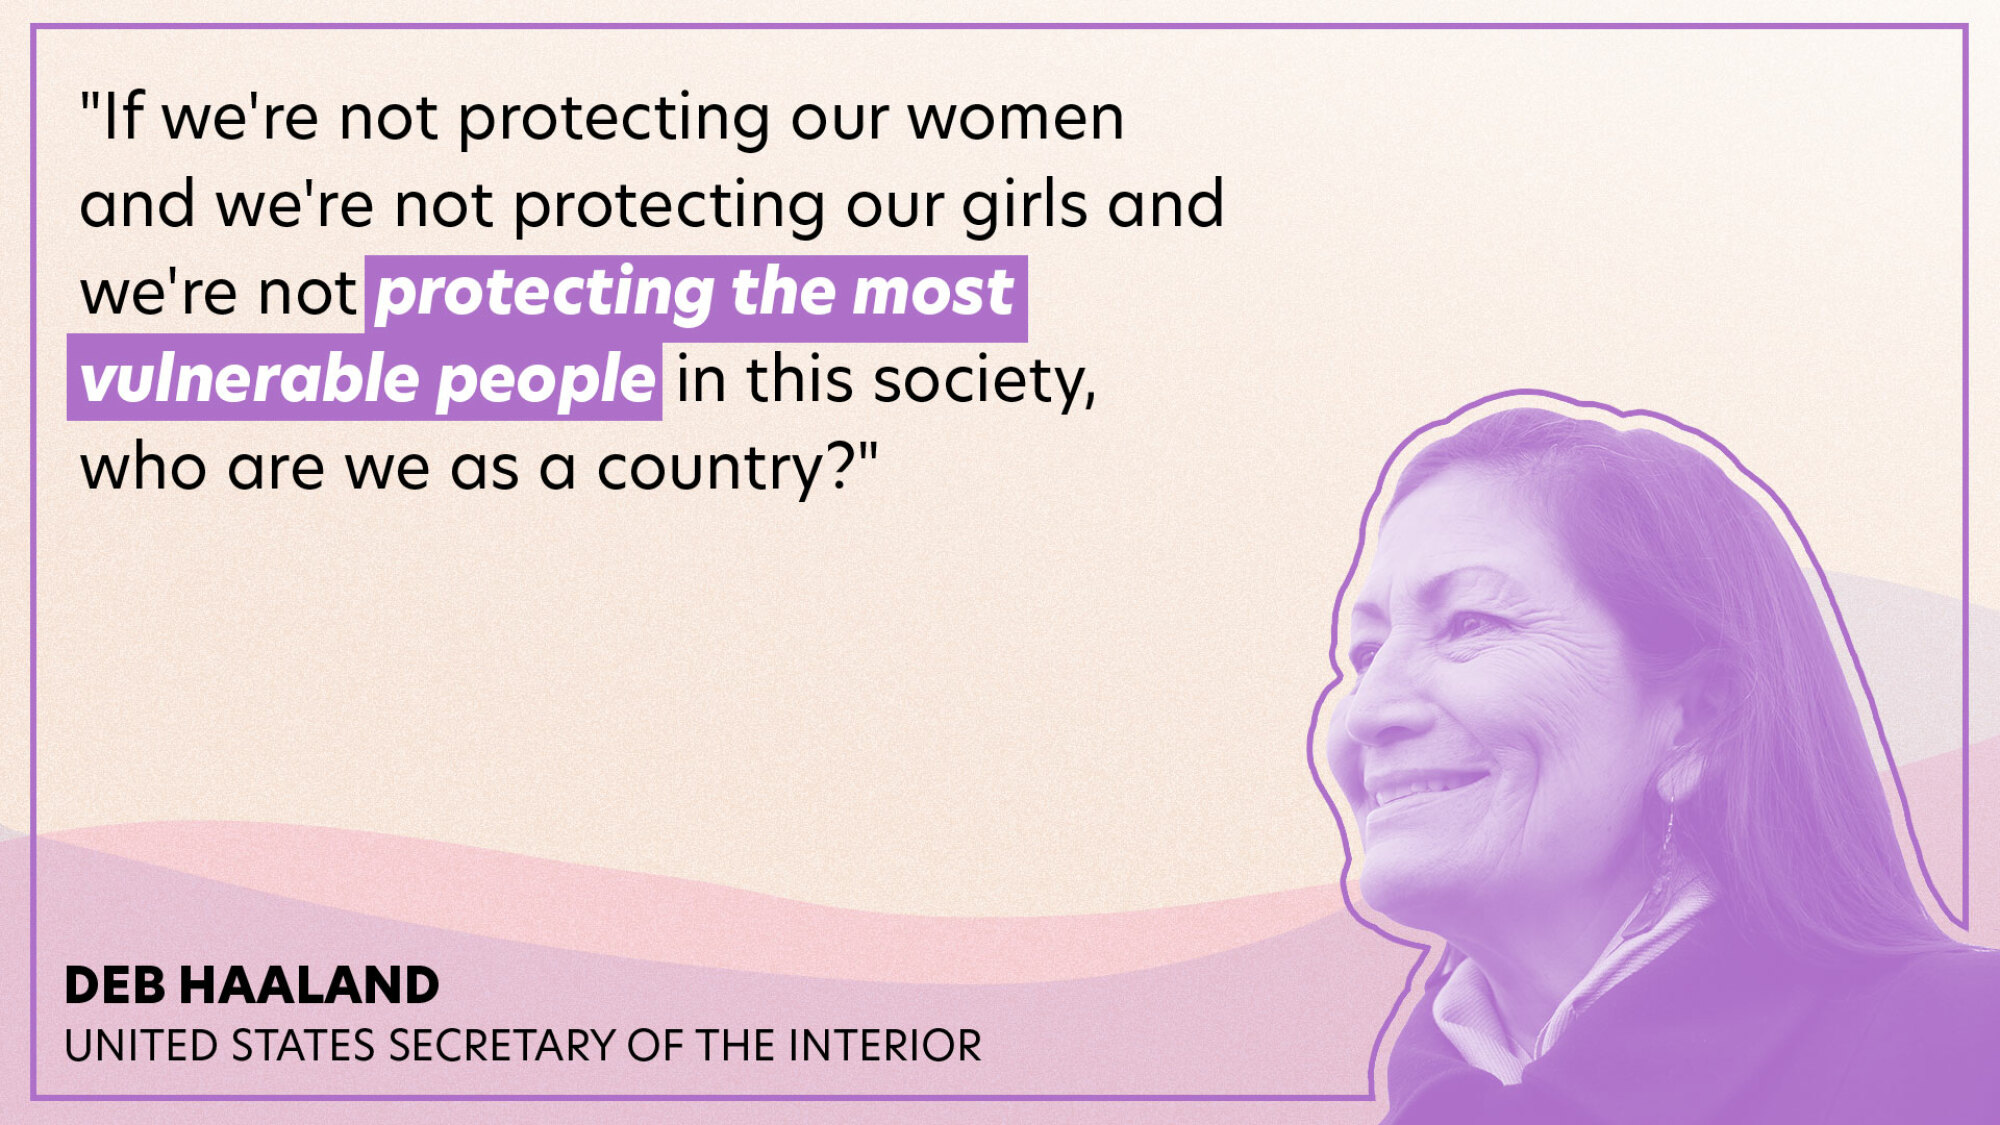 "If we're not protecting our women and we're not protecting our girls and we're not protecting the most vulnerable people in this society, who are we as a country?"